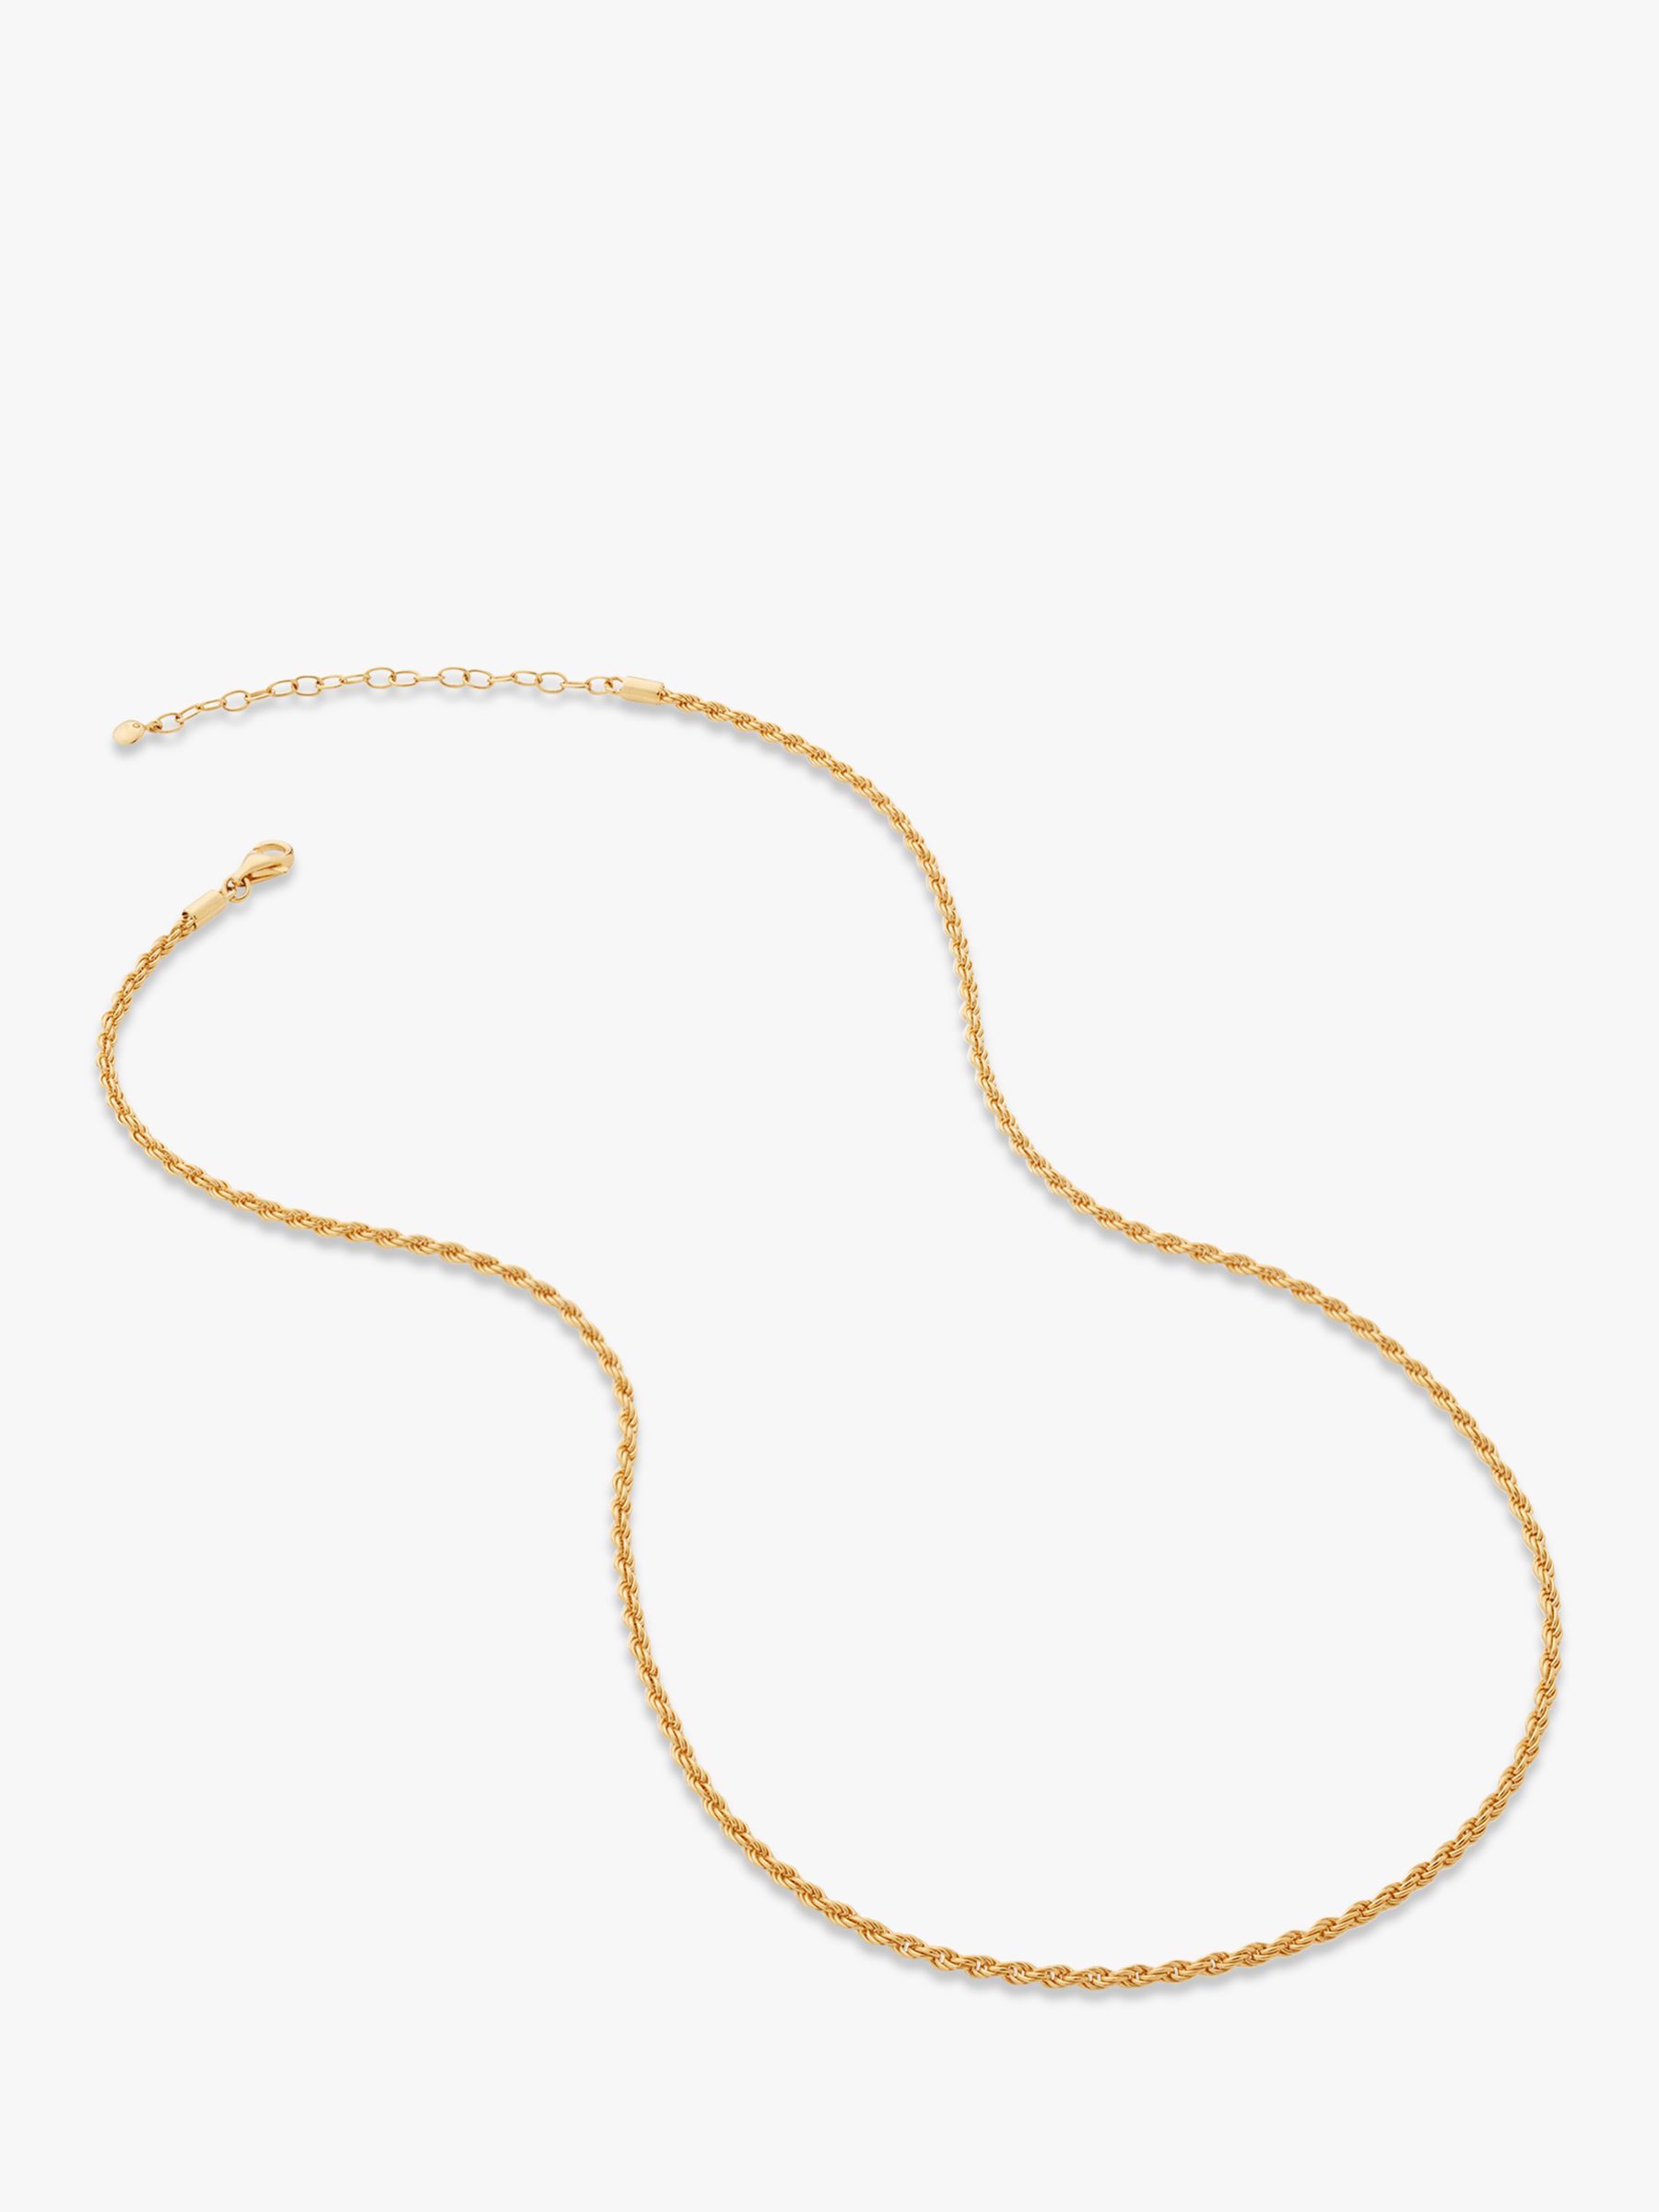 Monica Vinader Rope Chain Necklace, Gold at John Lewis & Partners